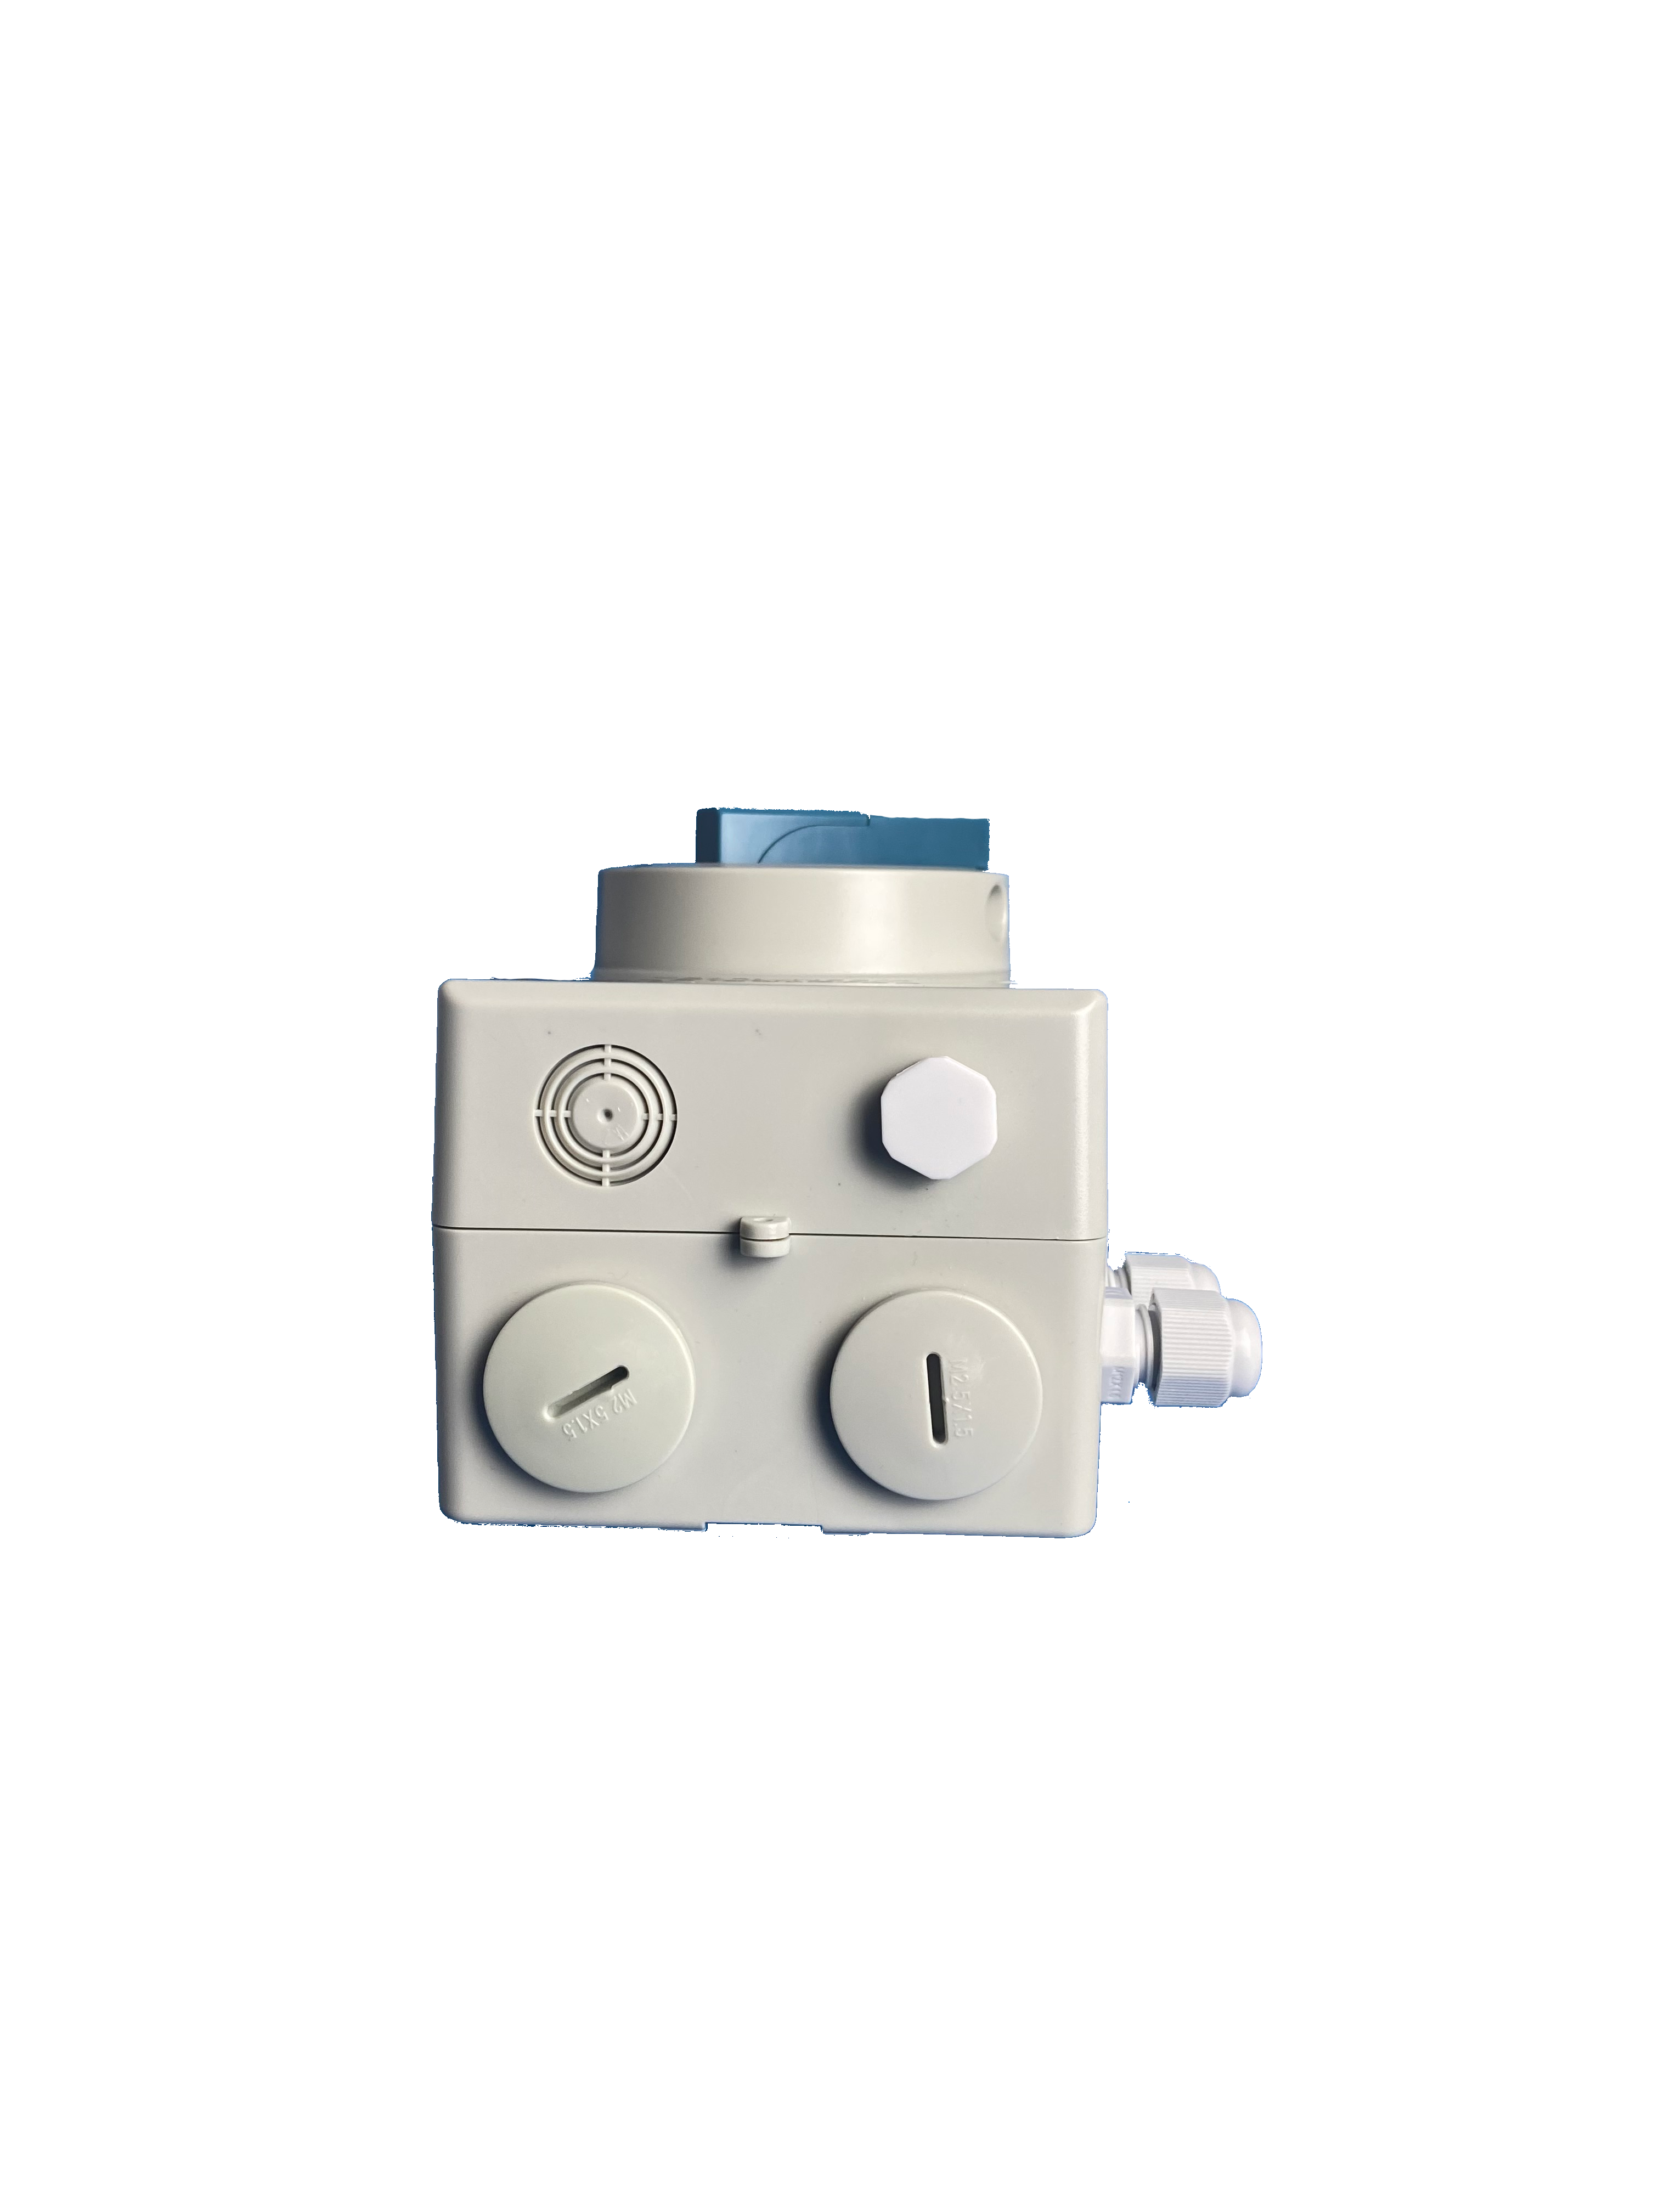 PV circuit breaker 1-string PROFILINE / for direct connection / fire department switch / solar circuit breaker